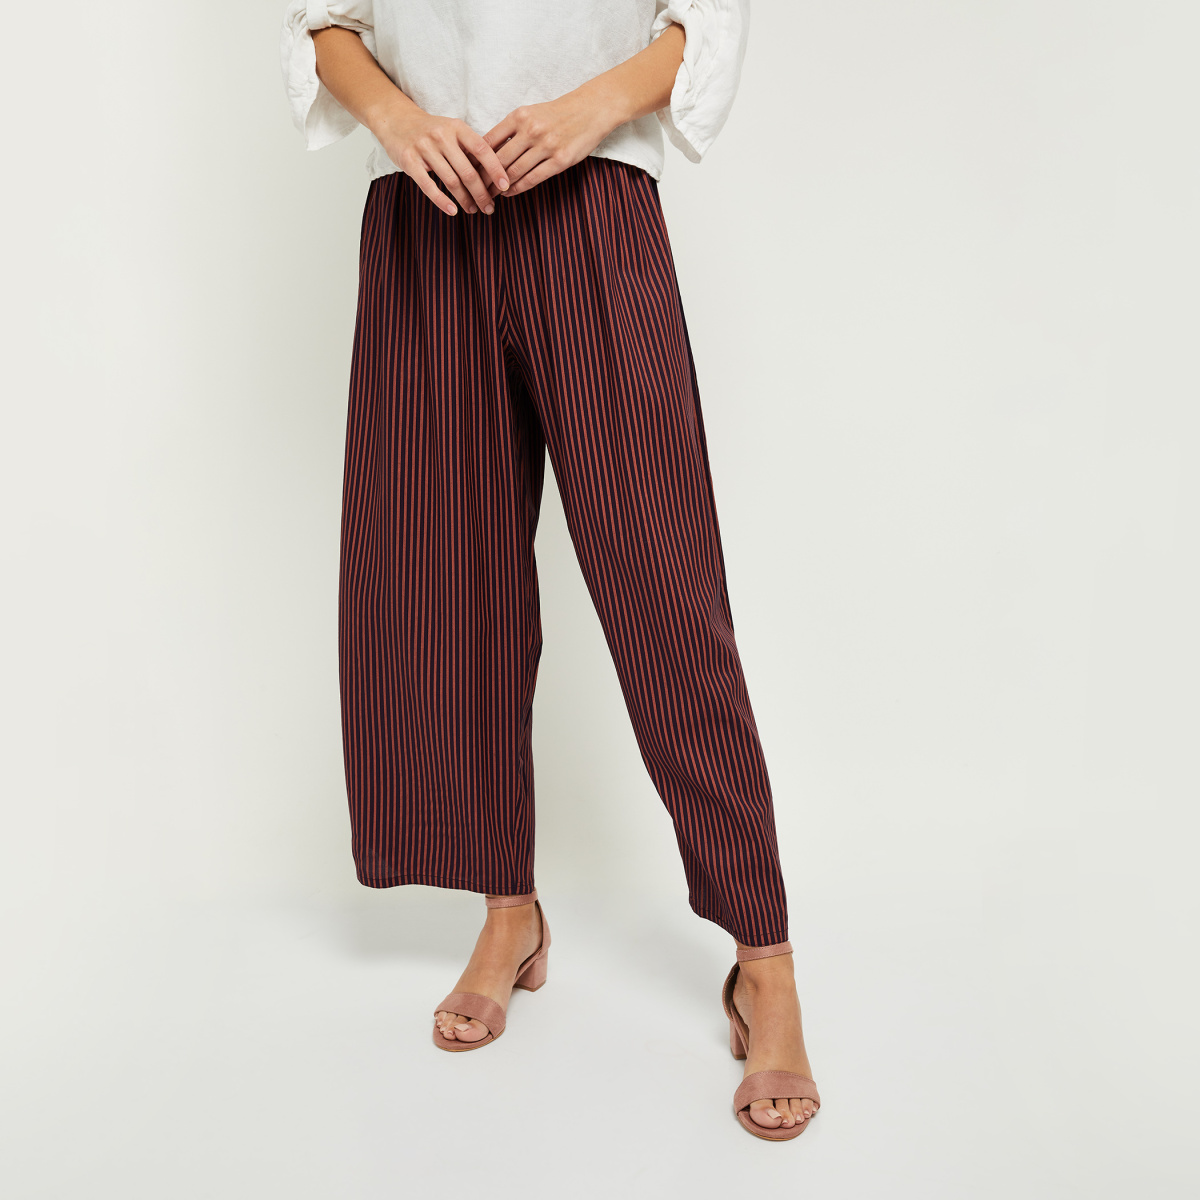 Femme Sequel Palazzo  Buy Femme Sequel Palm Palazzo Pants Tan Brown  Online  Nykaa Fashion